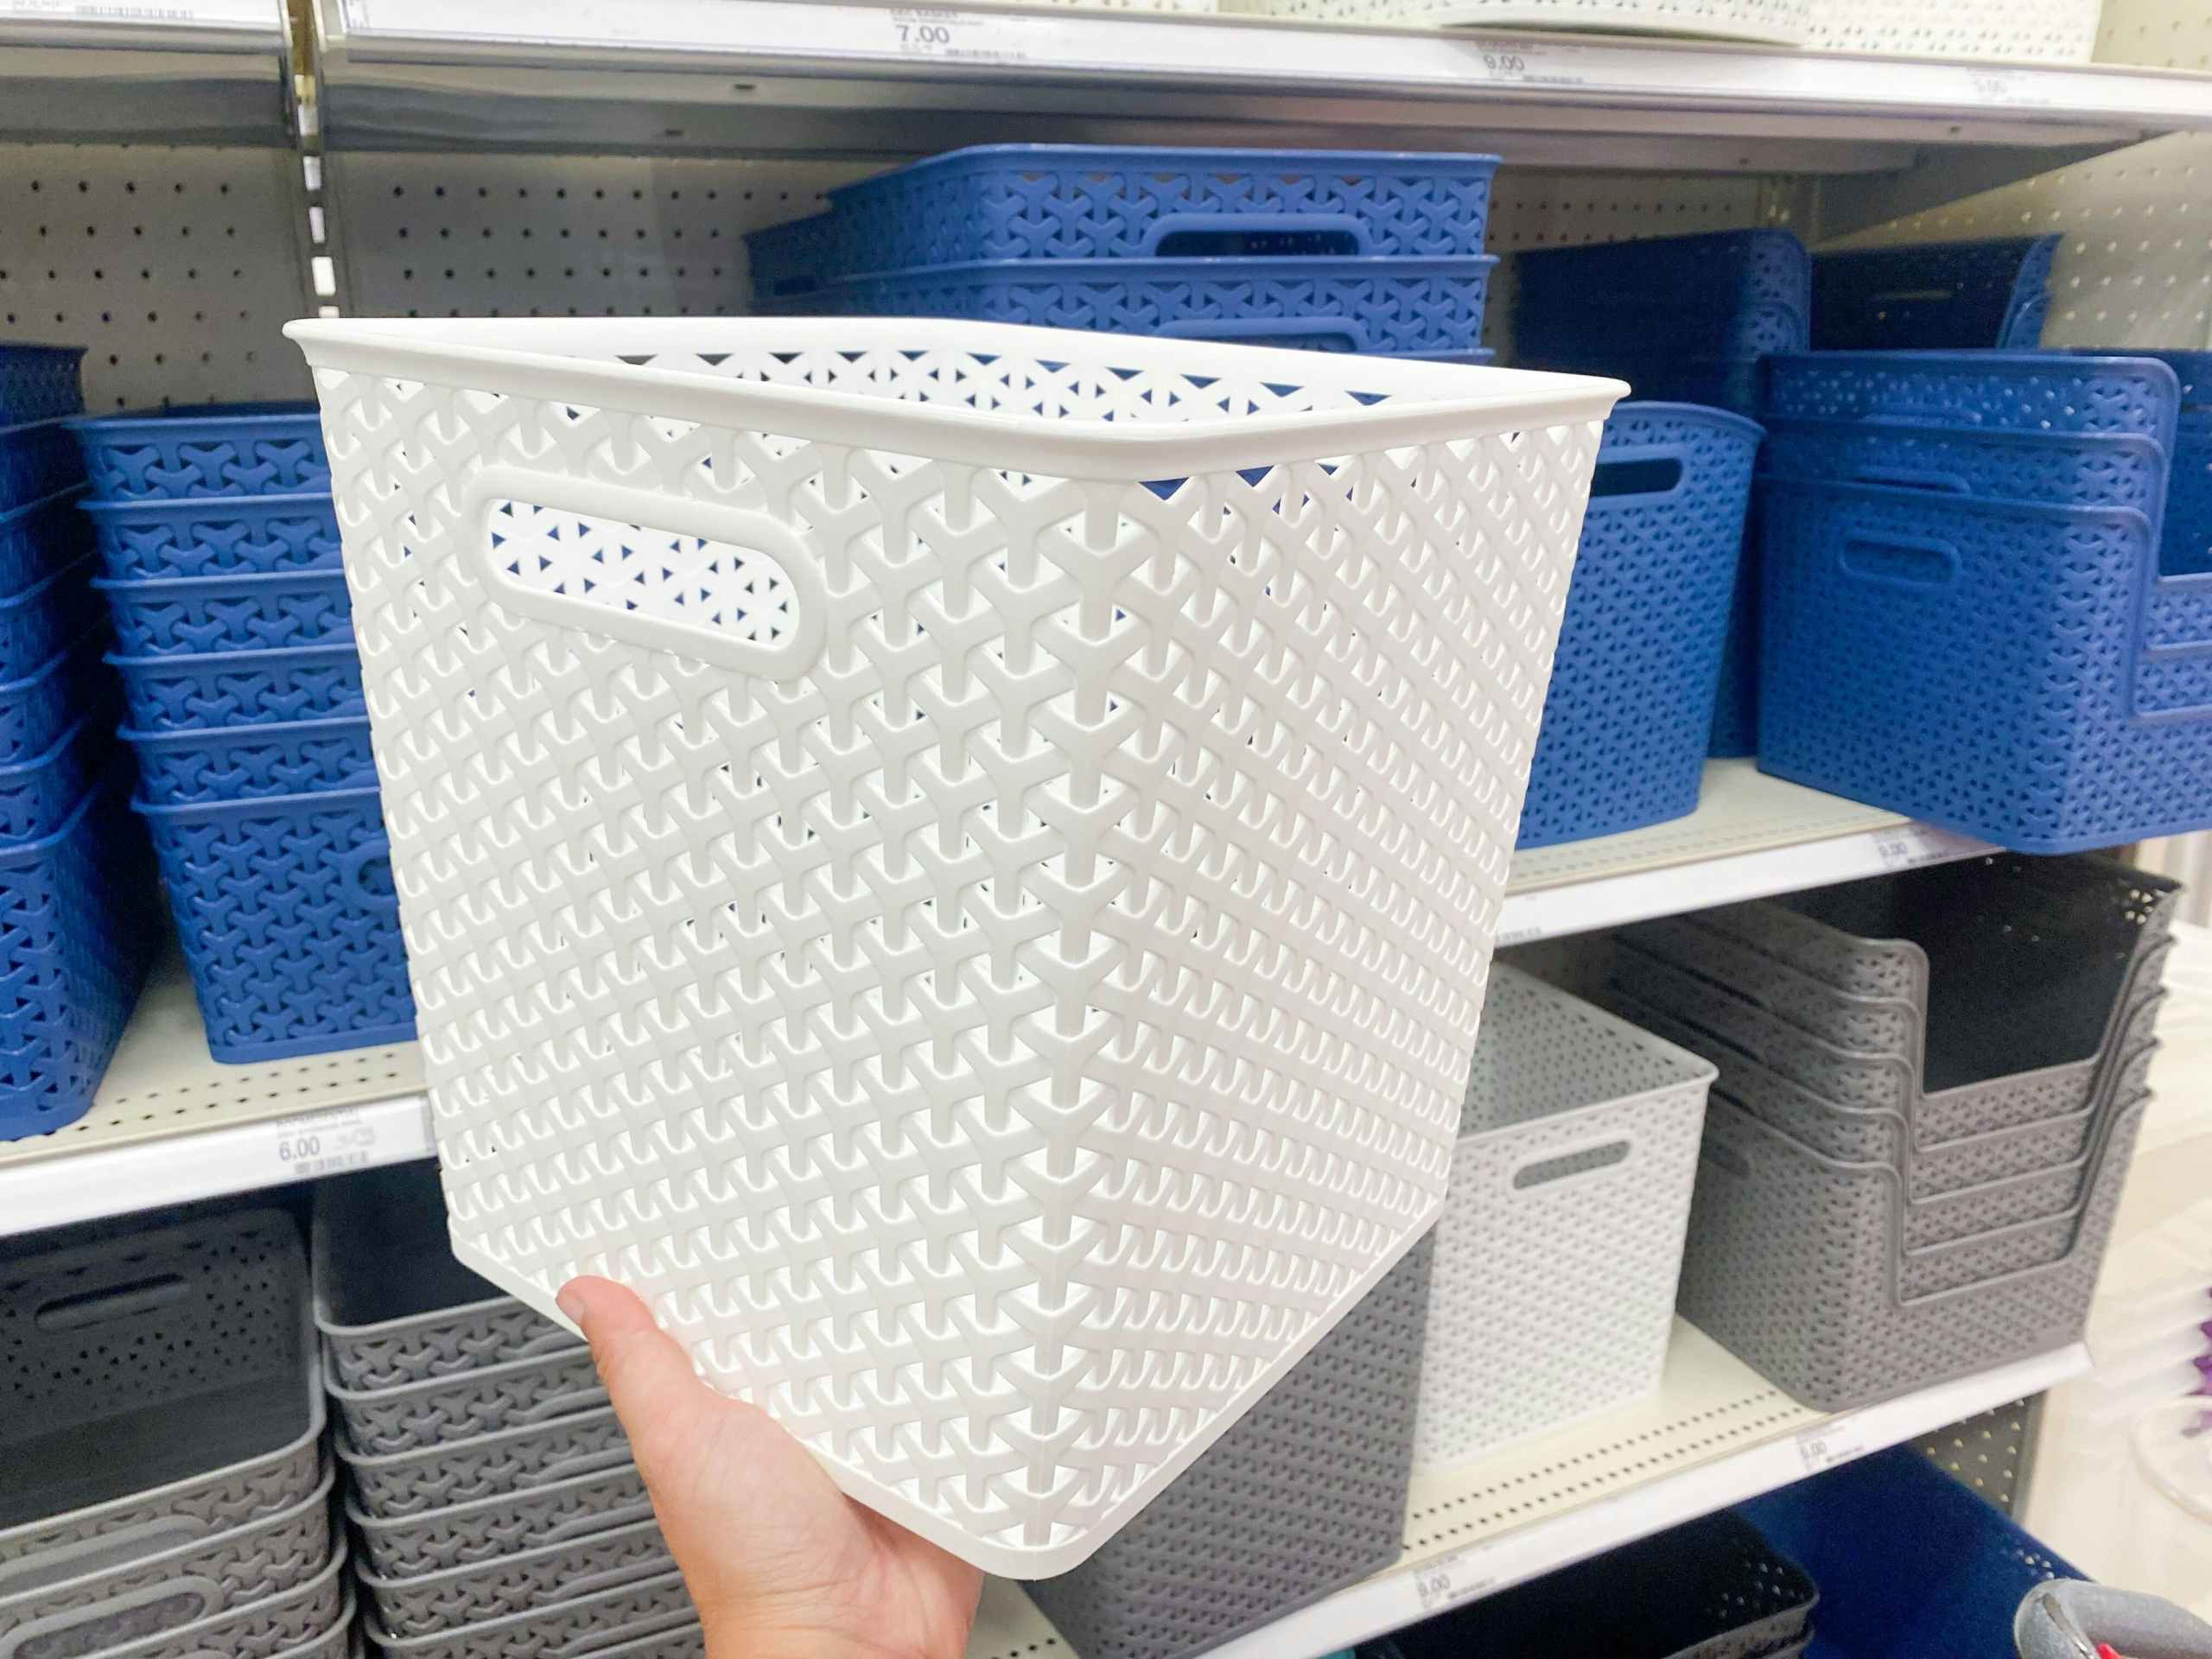 A hand holding a white decorative storage basket in front of a shelf with other storage baskets